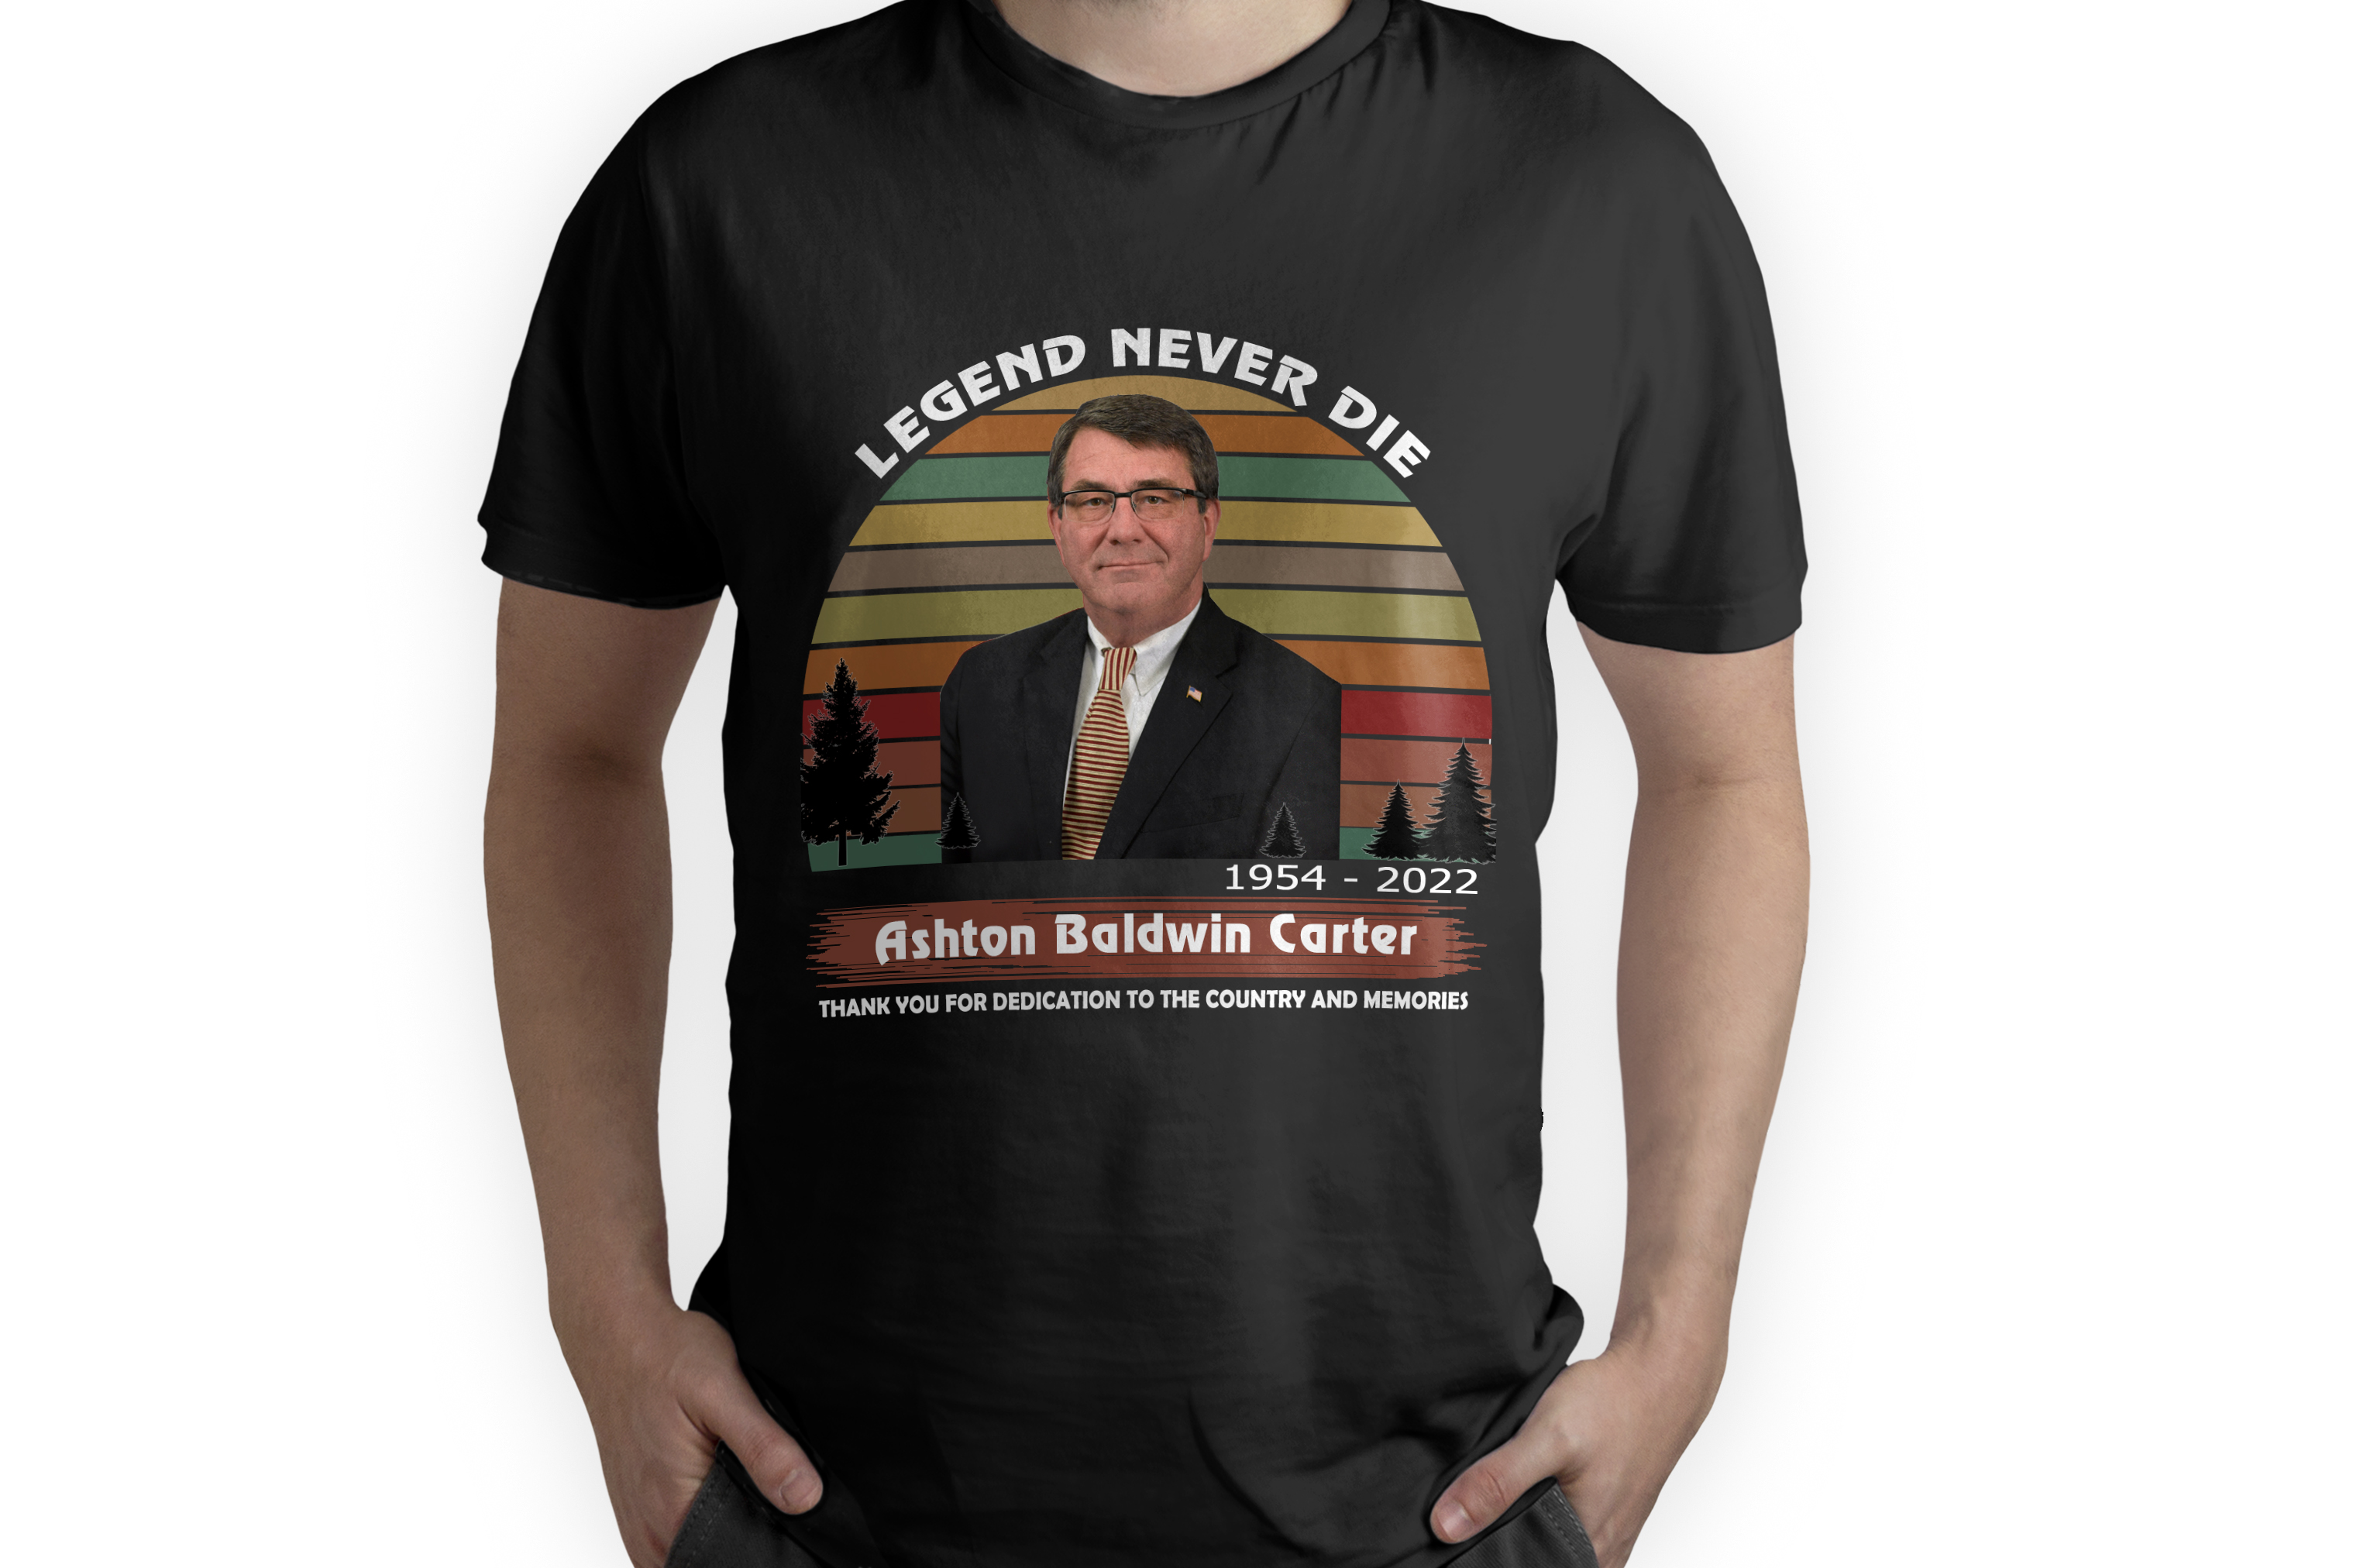 Ash Carter Shirts - Thank You For Dedication To The Country And Memories Shirt Size Up To 5xl | Trending Shirts